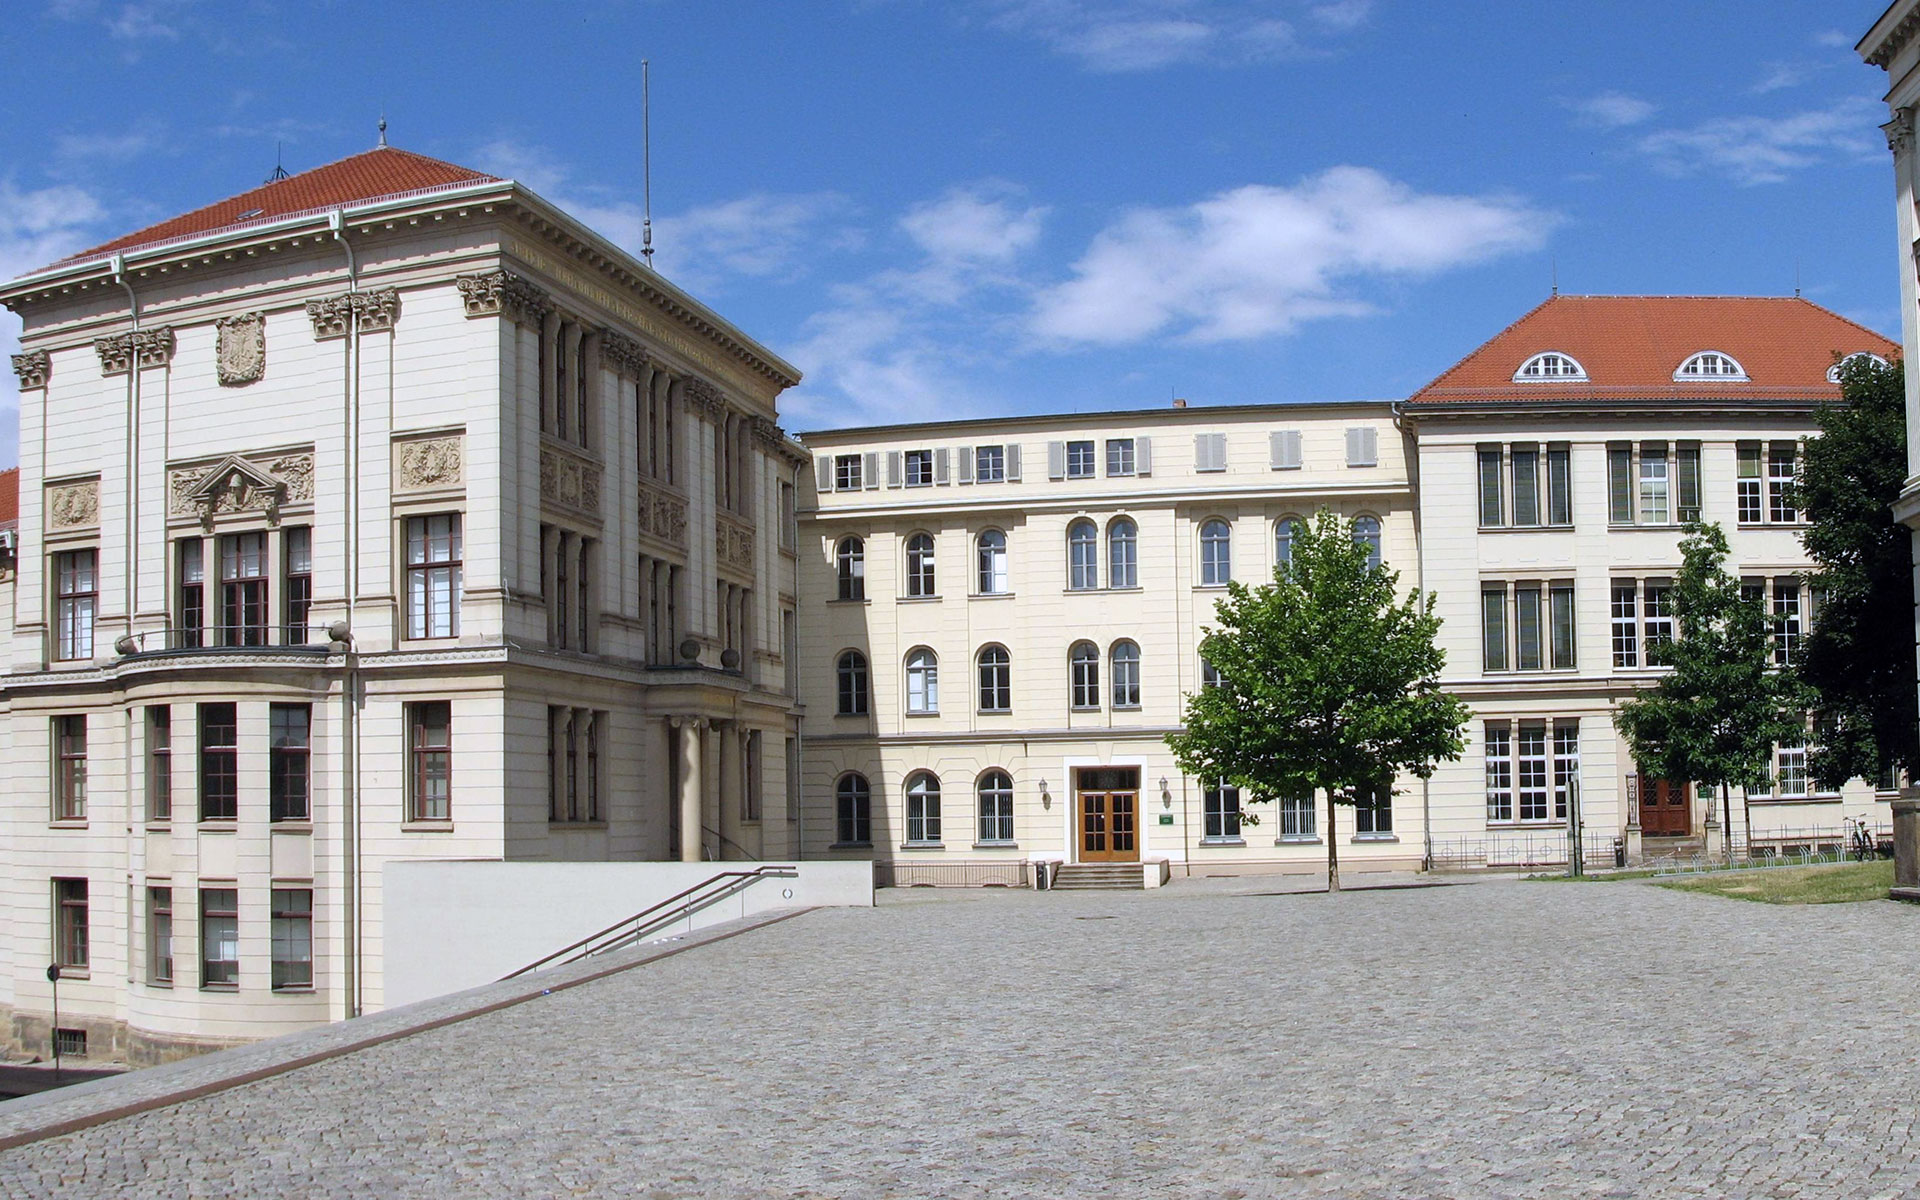 The Martin Luther University in the east German town of Halle (photo © Singhsomendra).